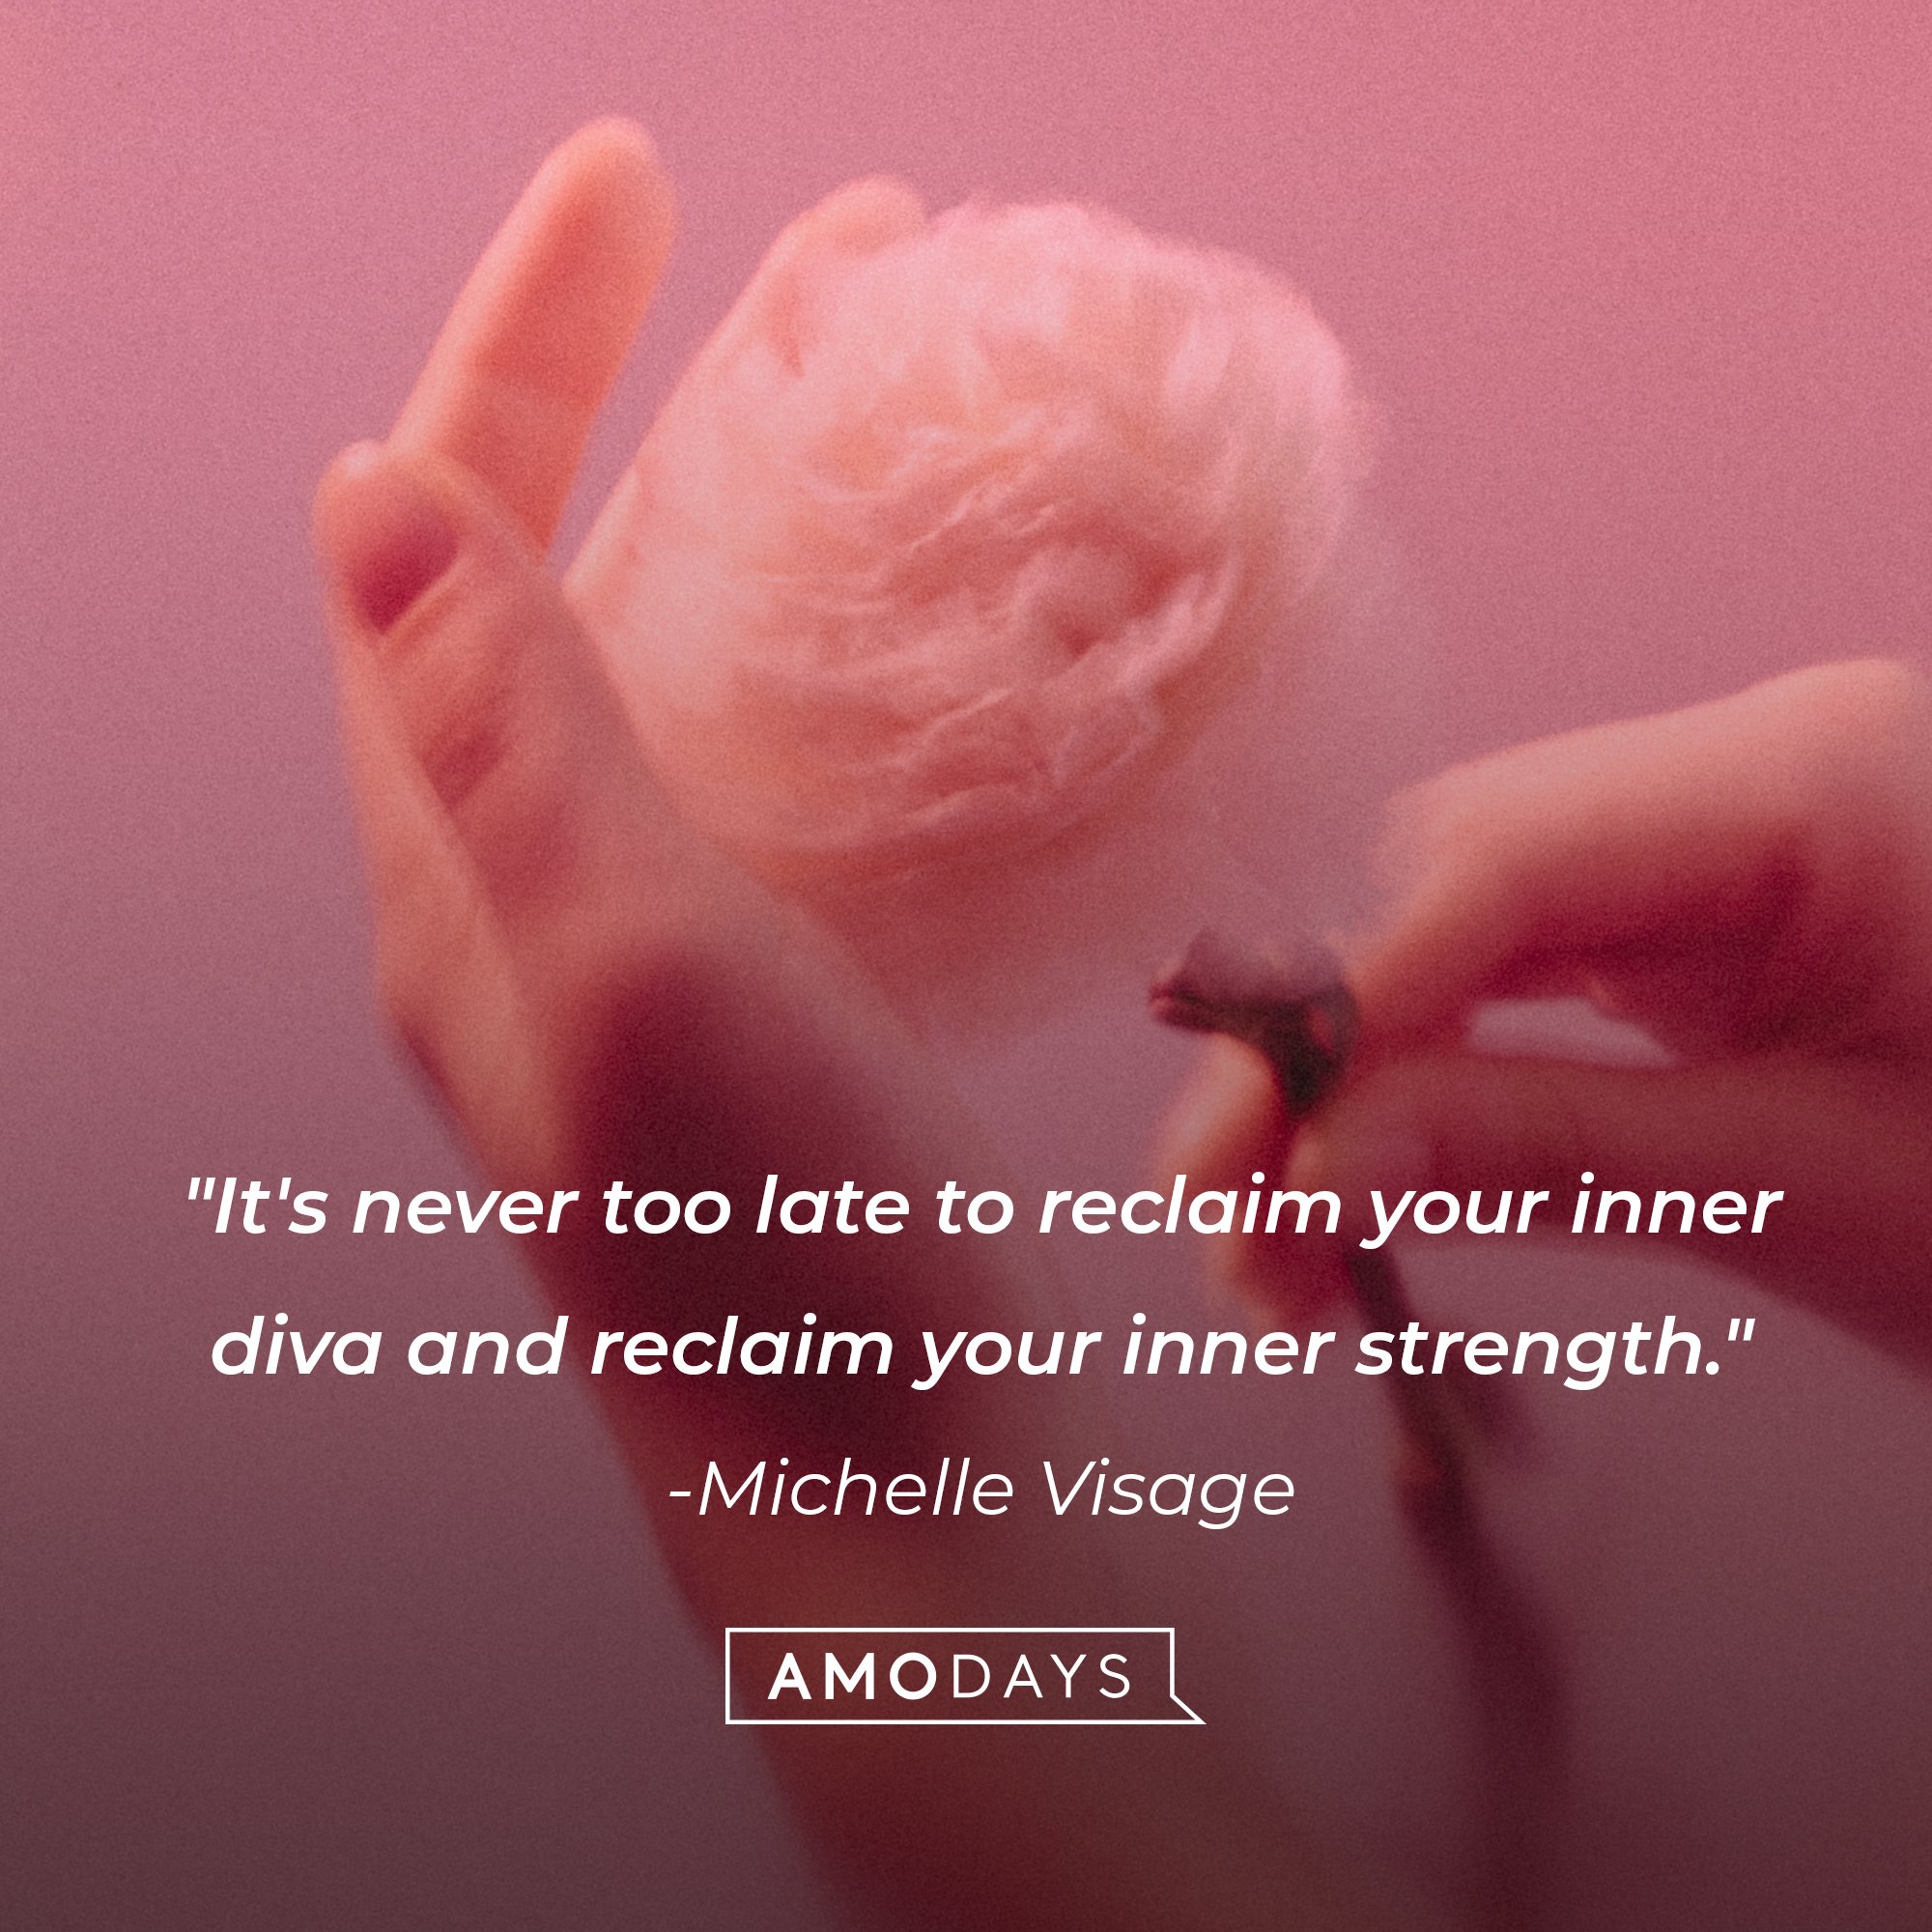 Michelle Visage’s quote: "It's never too late to reclaim your inner diva and reclaim your inner strength." | Image: AmoDays